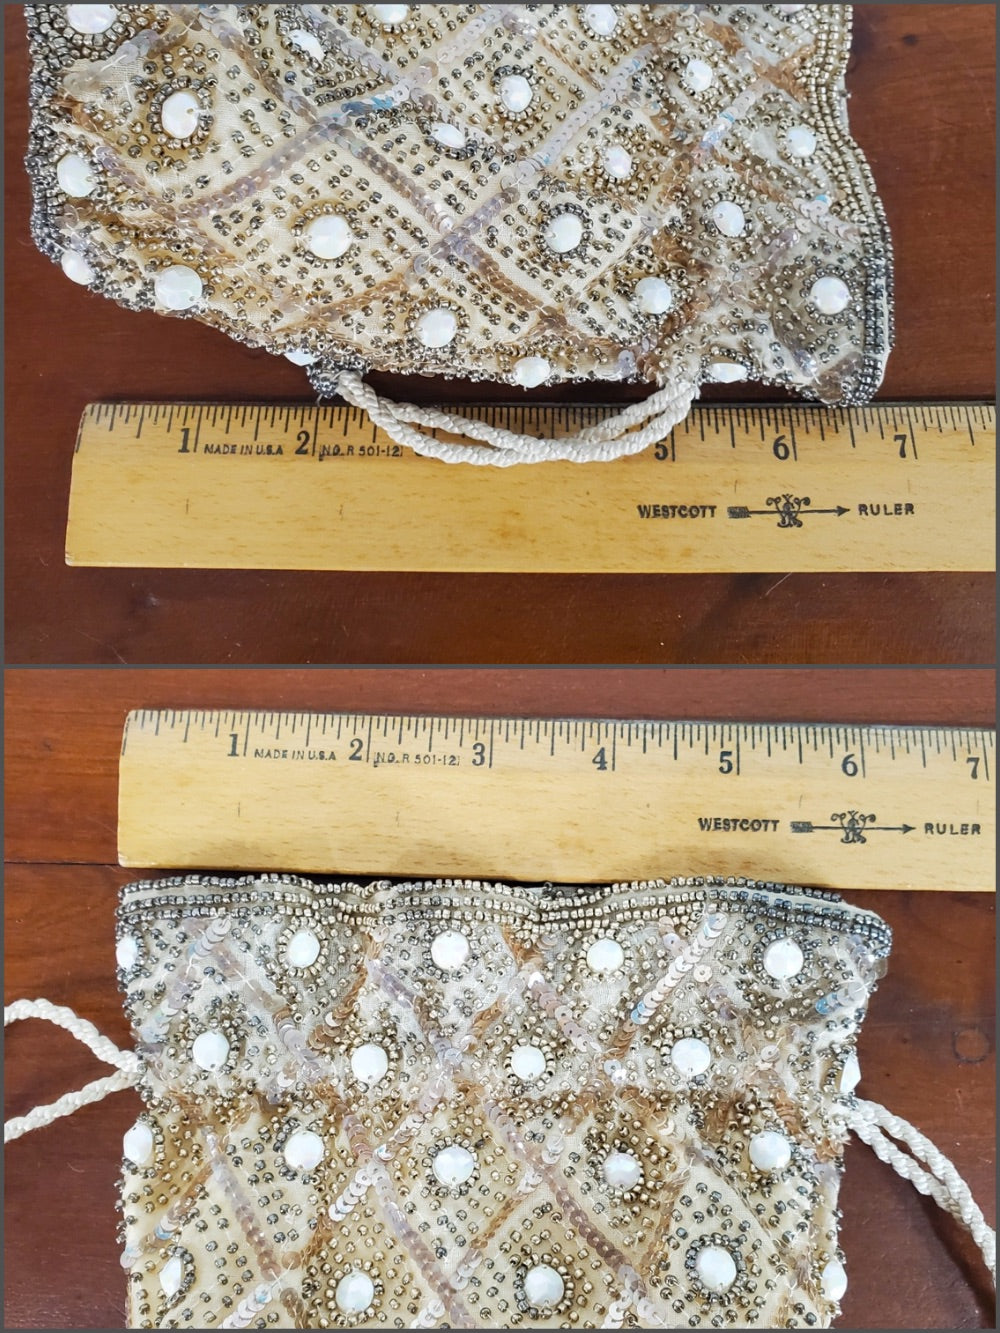 Vintage Beaded Purse Vintage Wristlet Seed Beads on Fabric 1900s Formal Handbag  Antique Beaded Purse Collectible Beaded Bag - Etsy